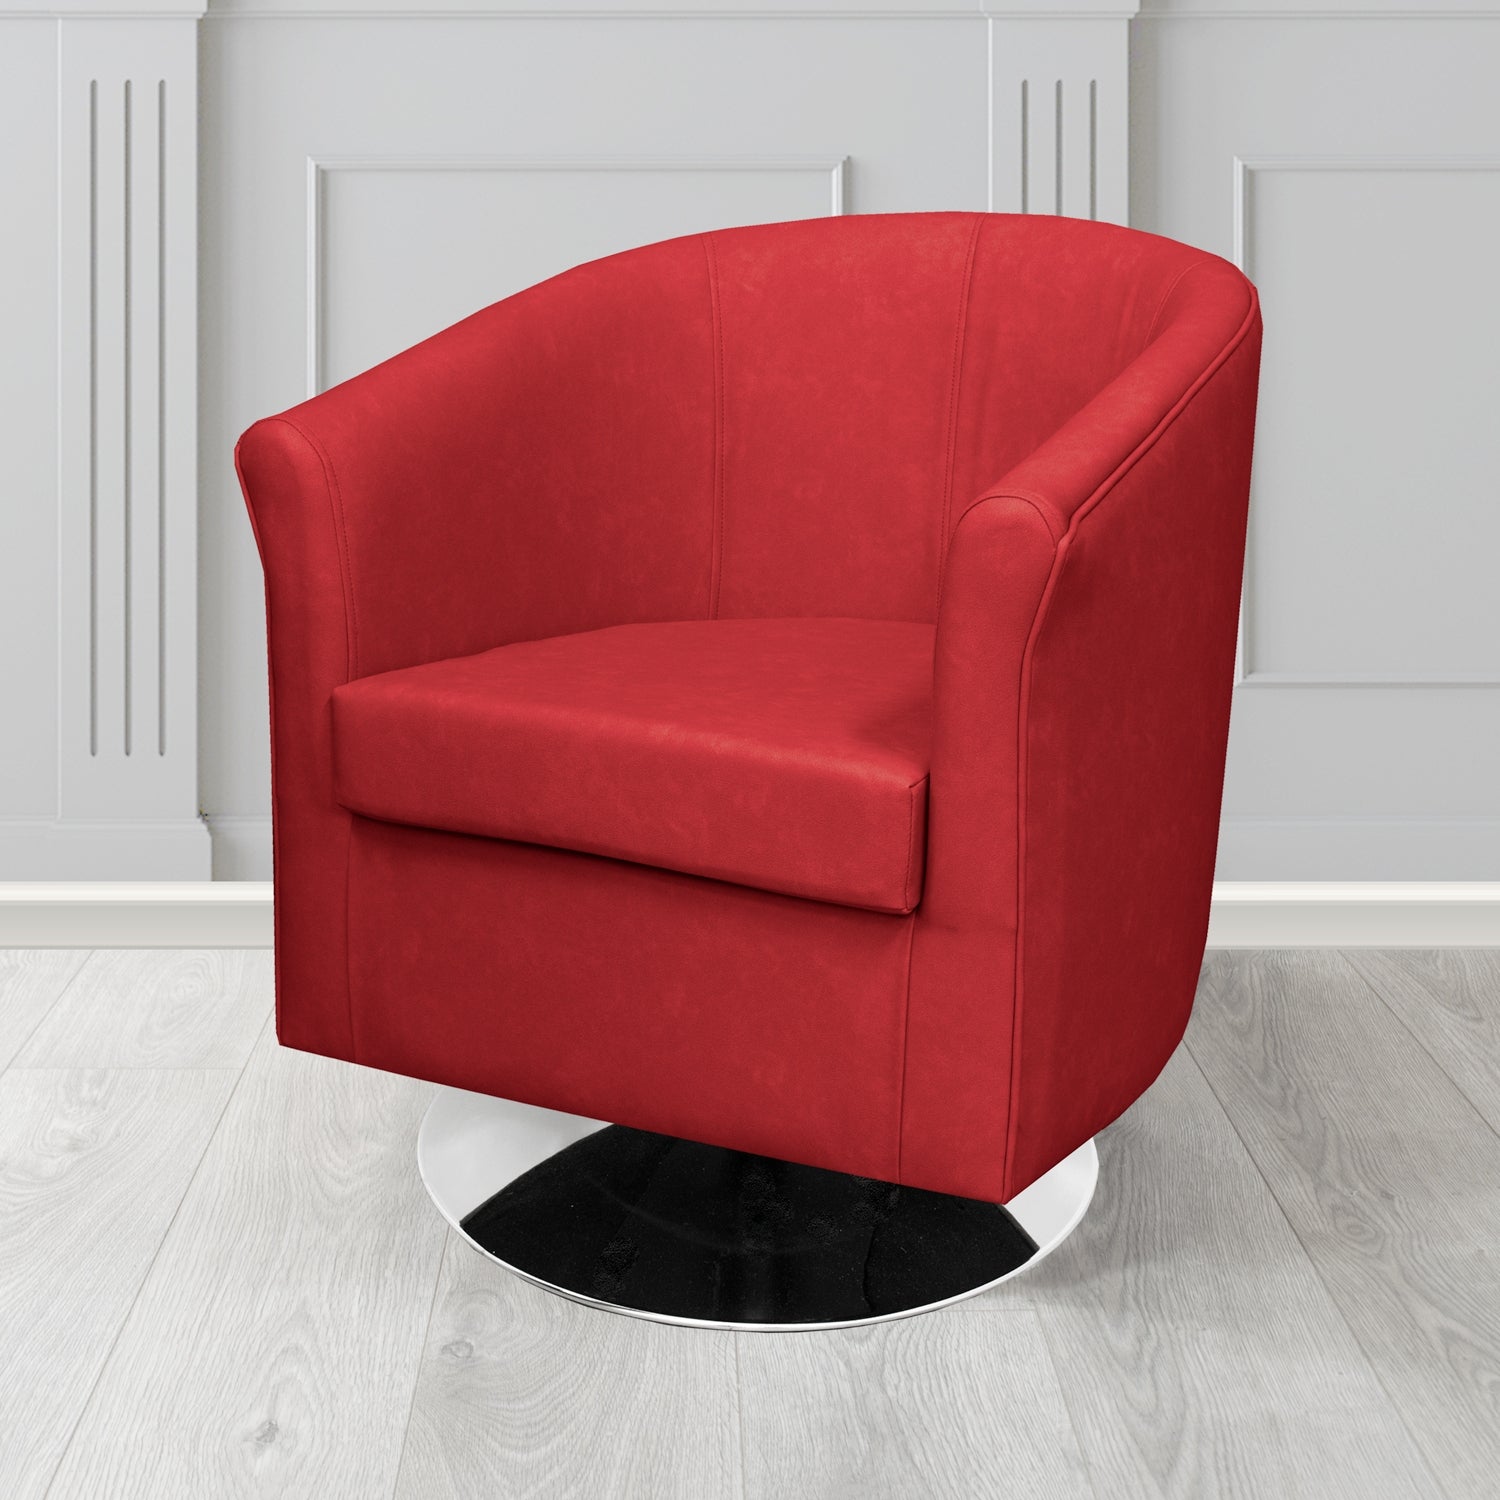 Tuscany Swivel Tub Chair in Infiniti Salsa INF1856 Antimicrobial Crib 5 Faux Leather - The Tub Chair Shop